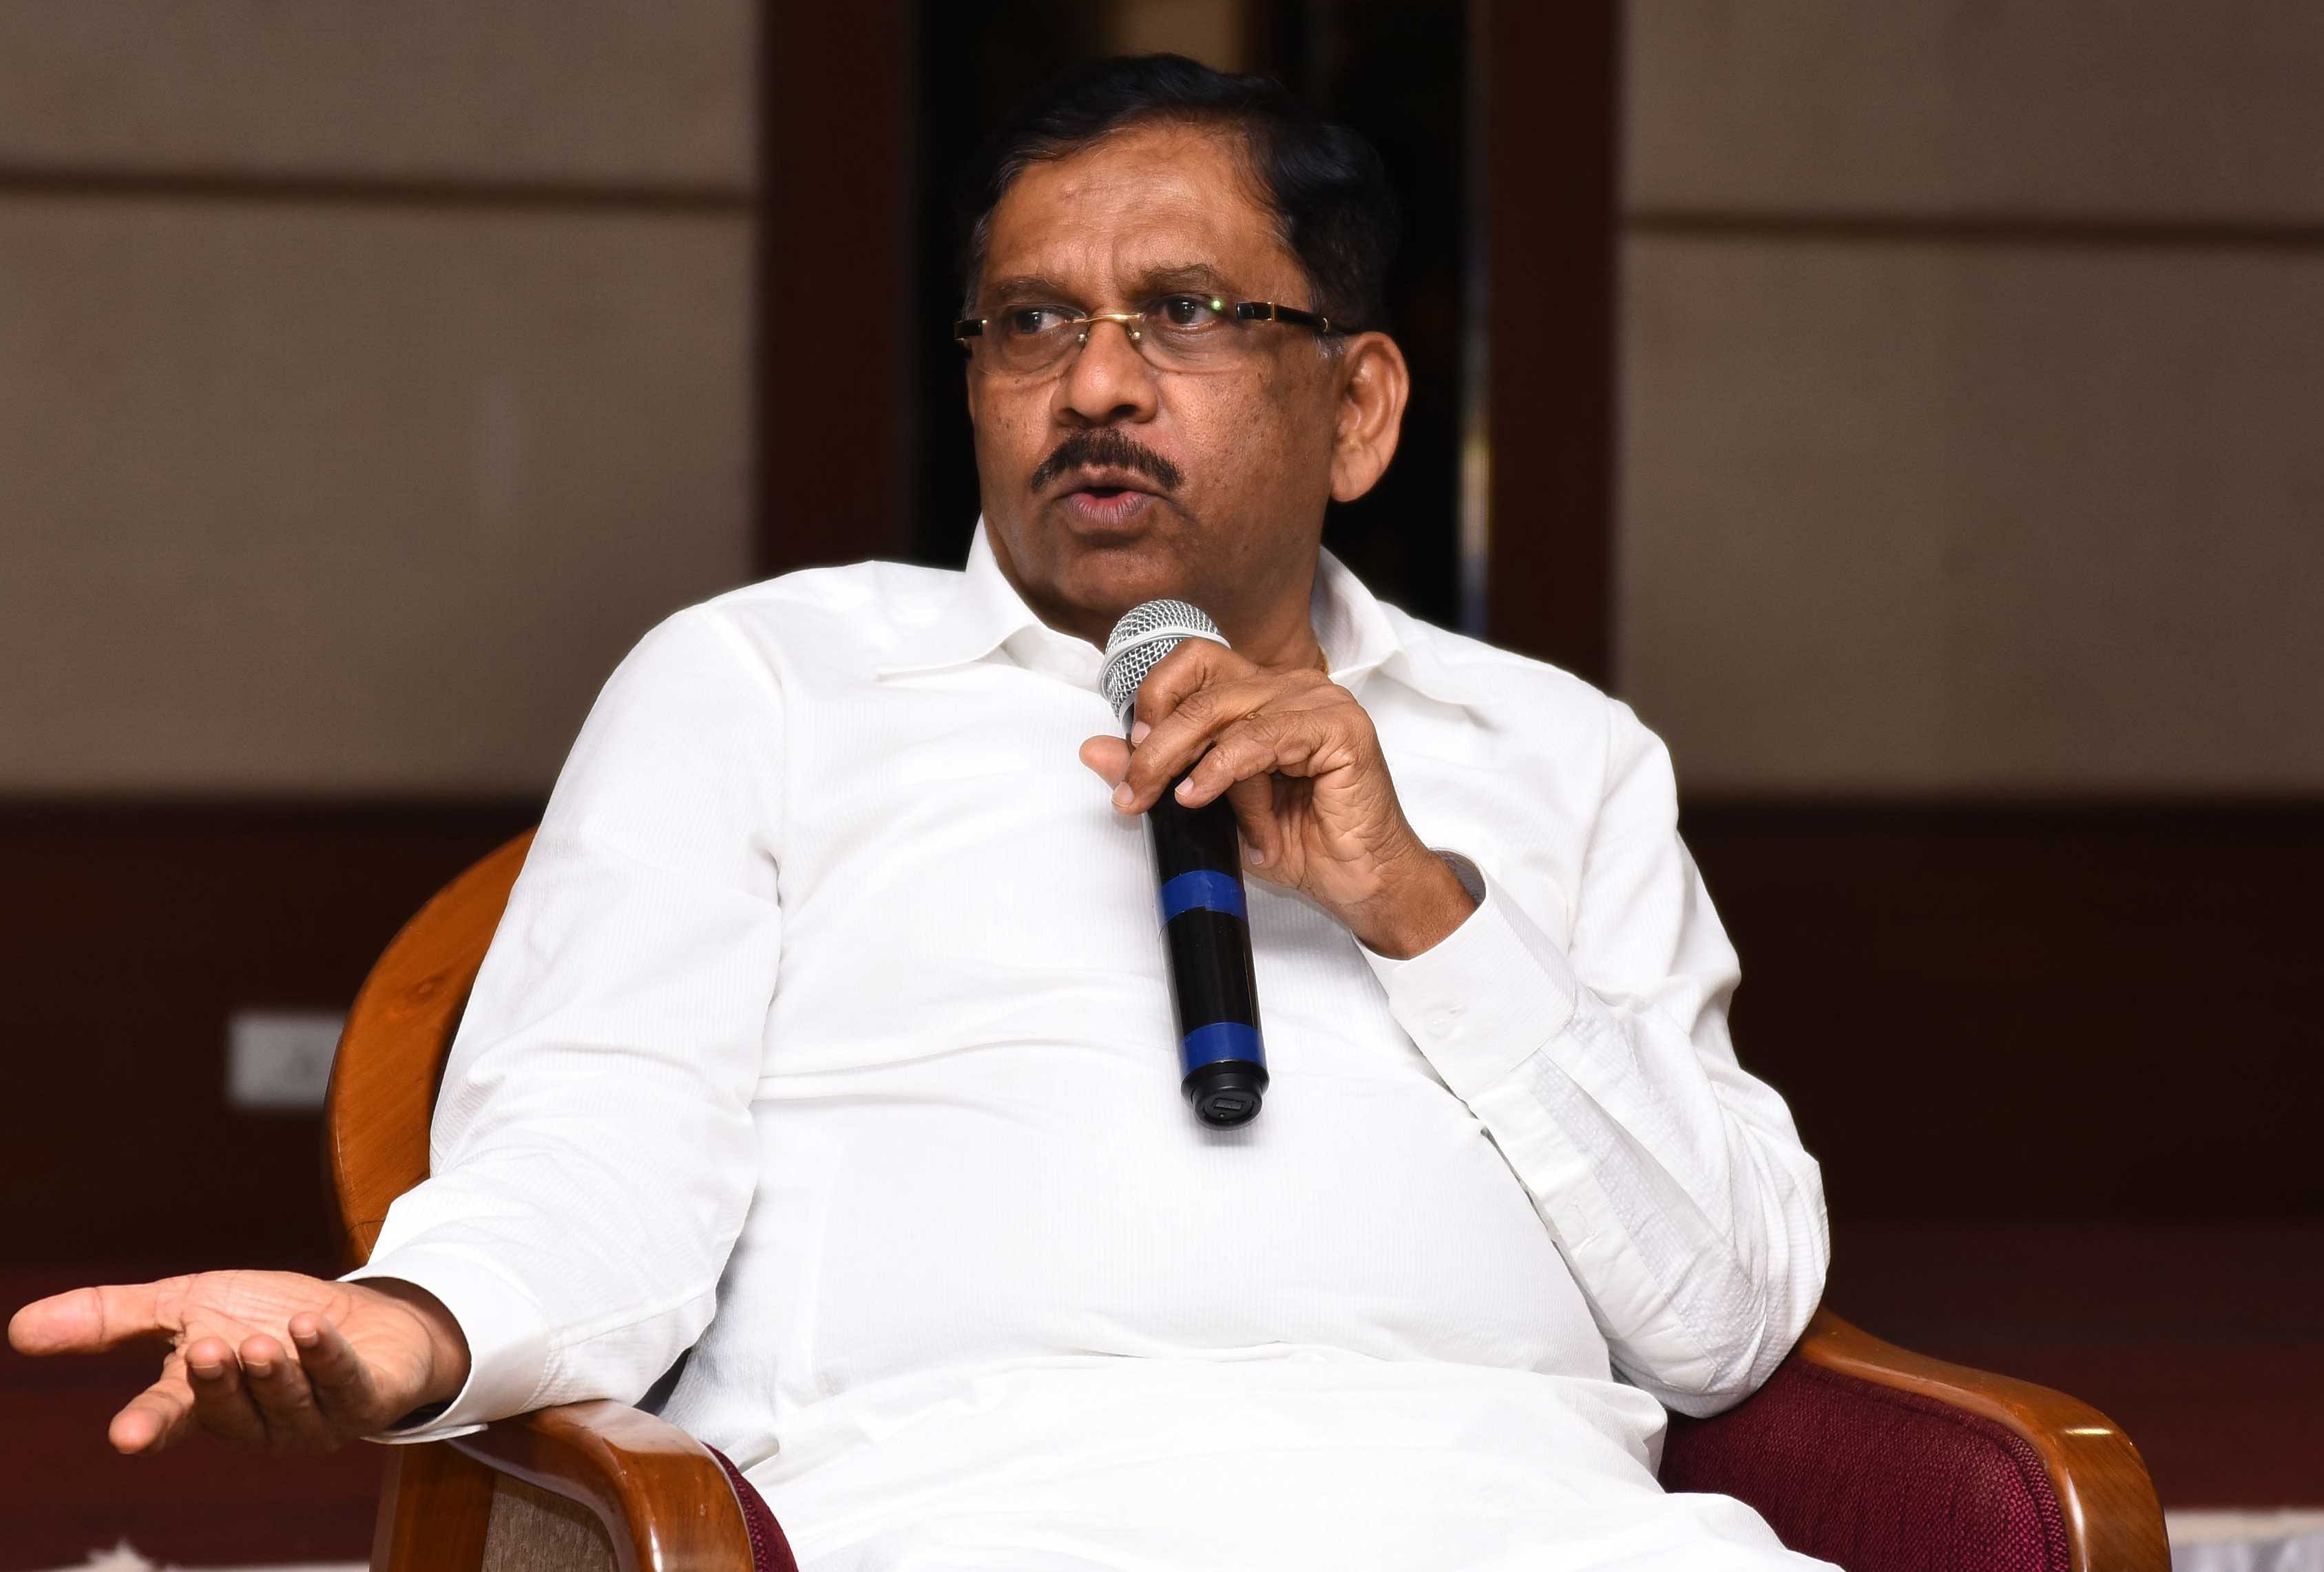 The event, attended by Parameshwara and BBMP commissioner N Manjunatha Prasad, provided BBMP with insight into people’s problems and issues that were affecting the smooth process of garbage collection and processing.